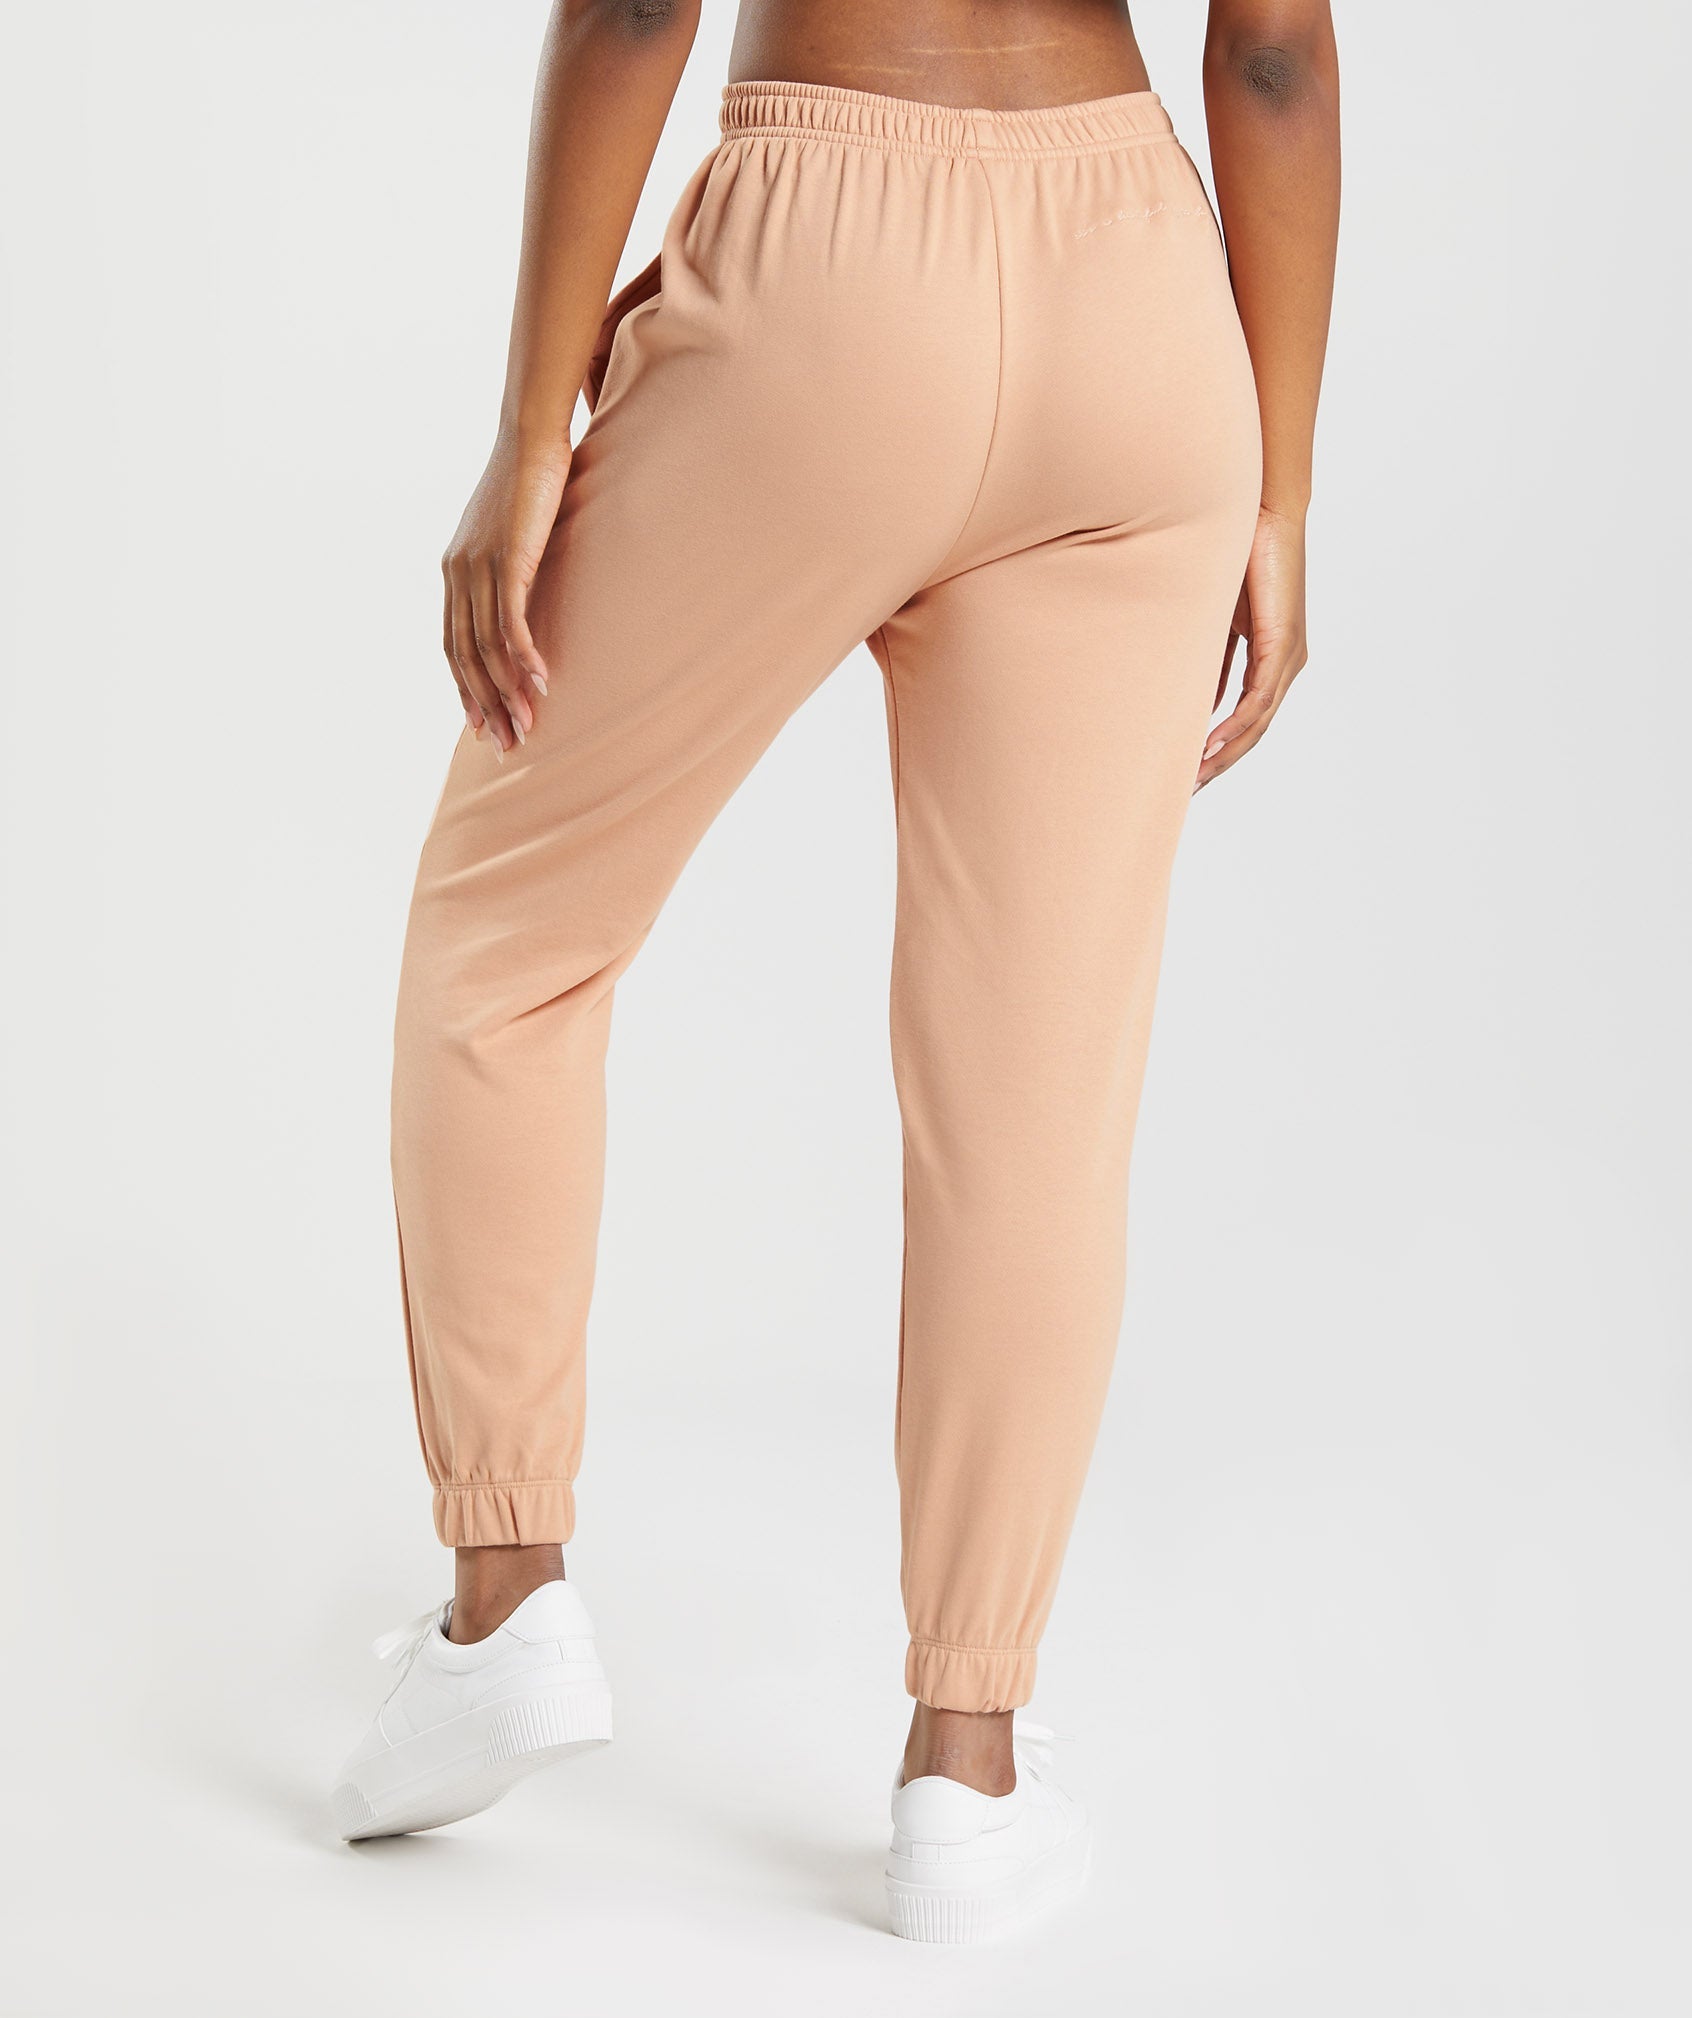 Whitney Loose Joggers in Sunset Beige - view 2